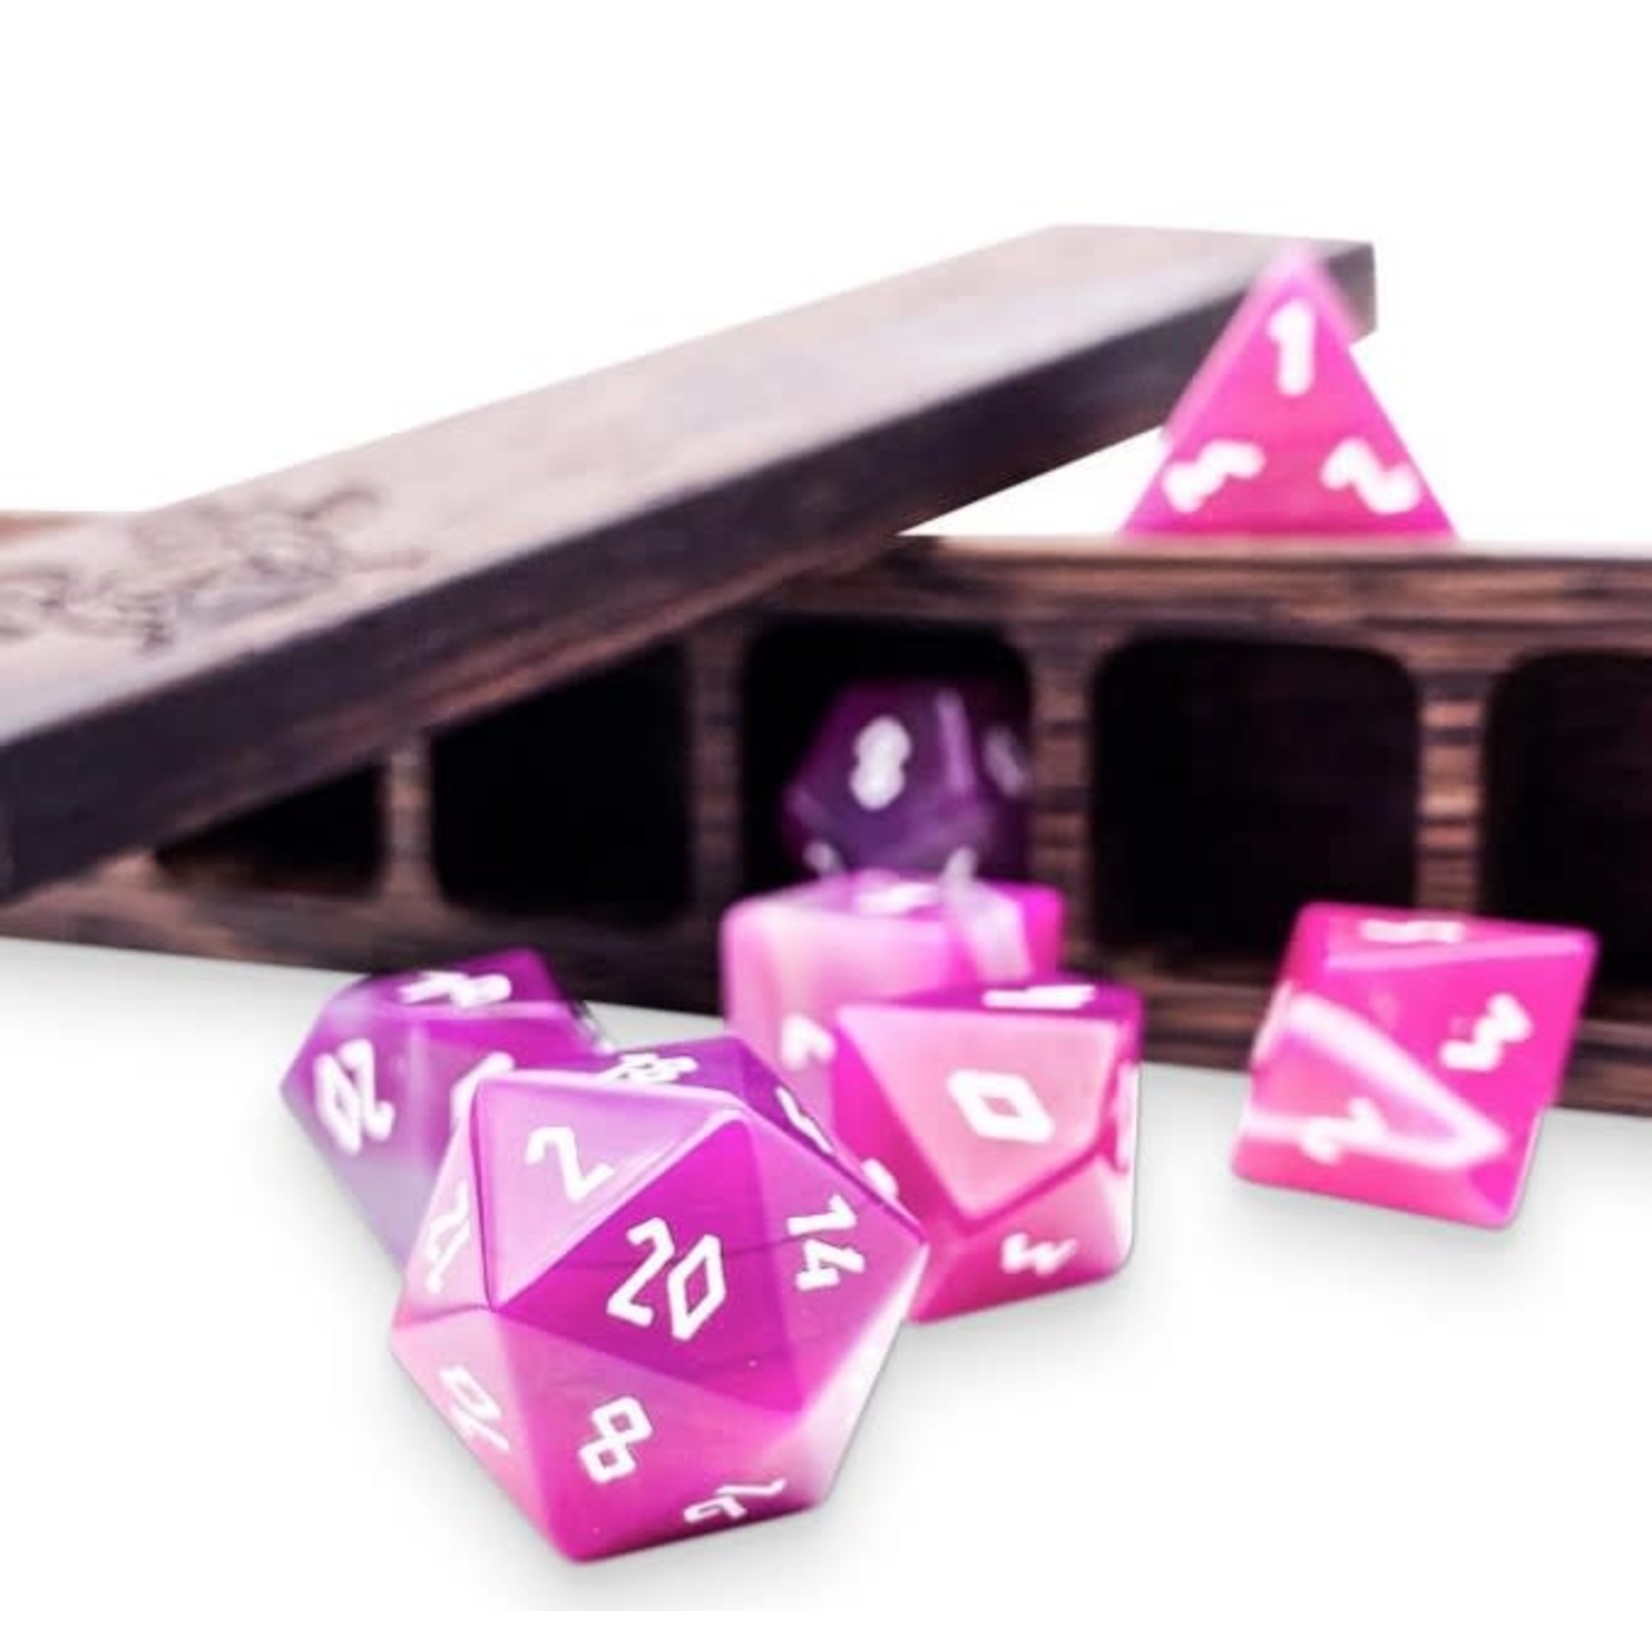 Norse Foundry Pink Striped Agate 7 Piece RPG Set Gemstone Dice